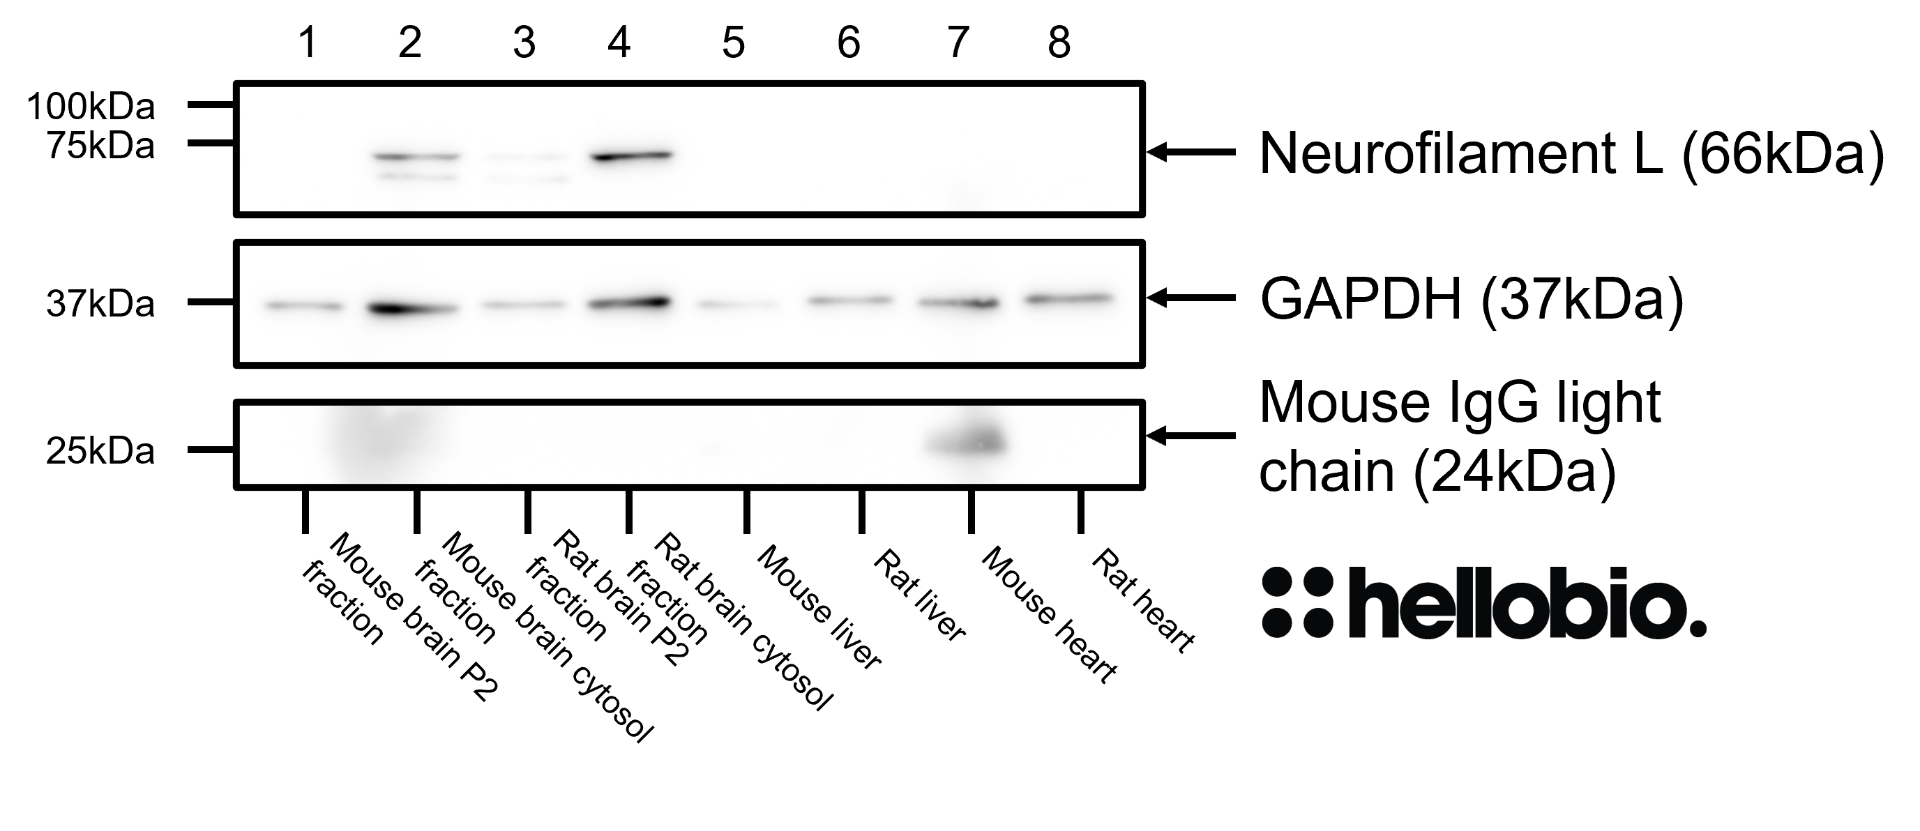 Figure 8. Neurofilament L expression in various tissue lysates and preparations with GAPDH loading control. 